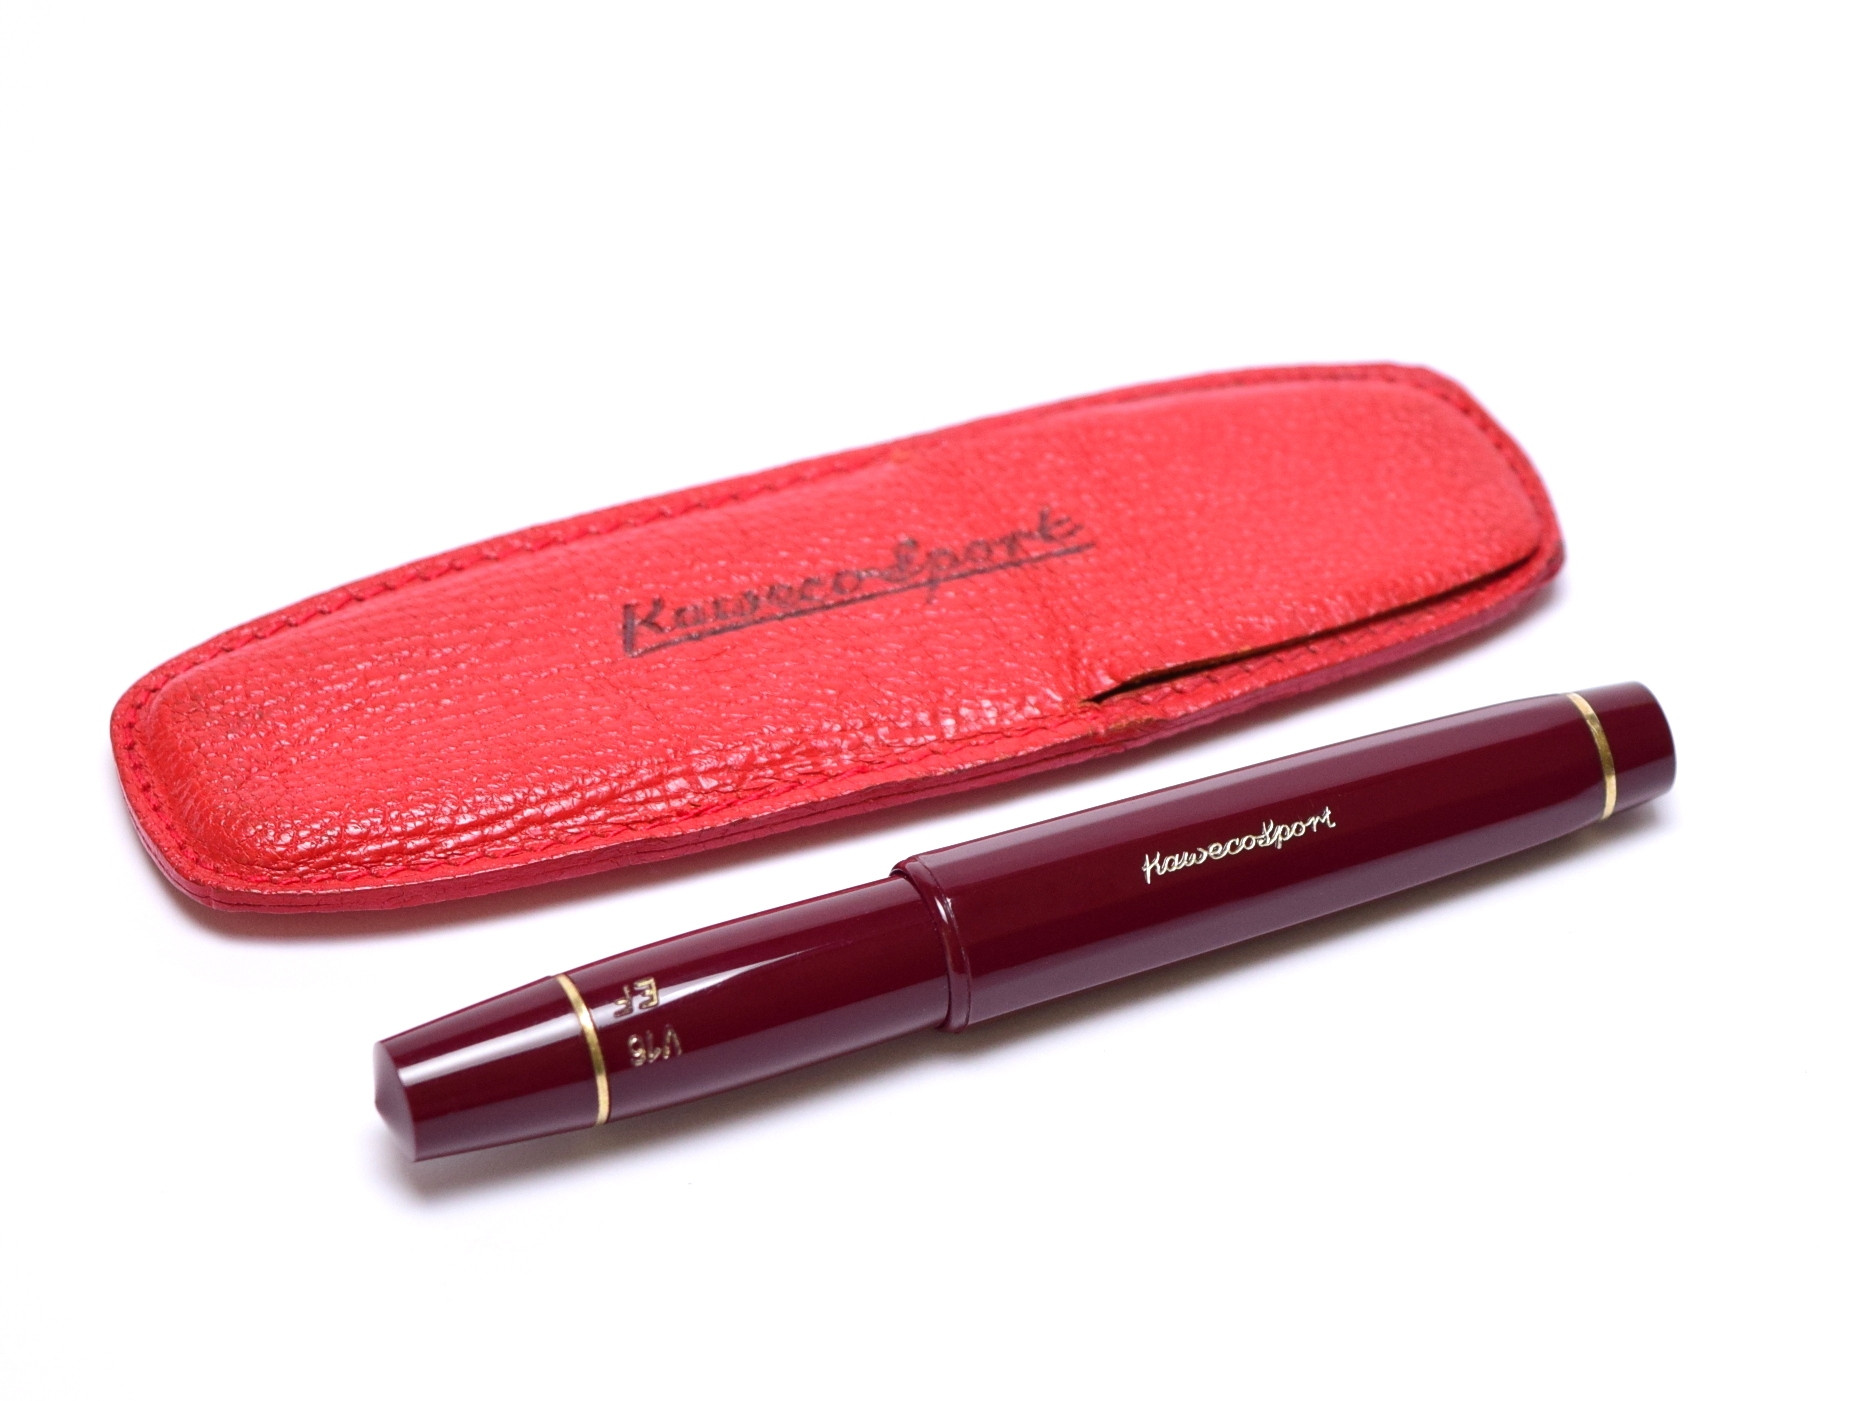 Kaweco Classic Sport Rollerball pen, Burgundy Red